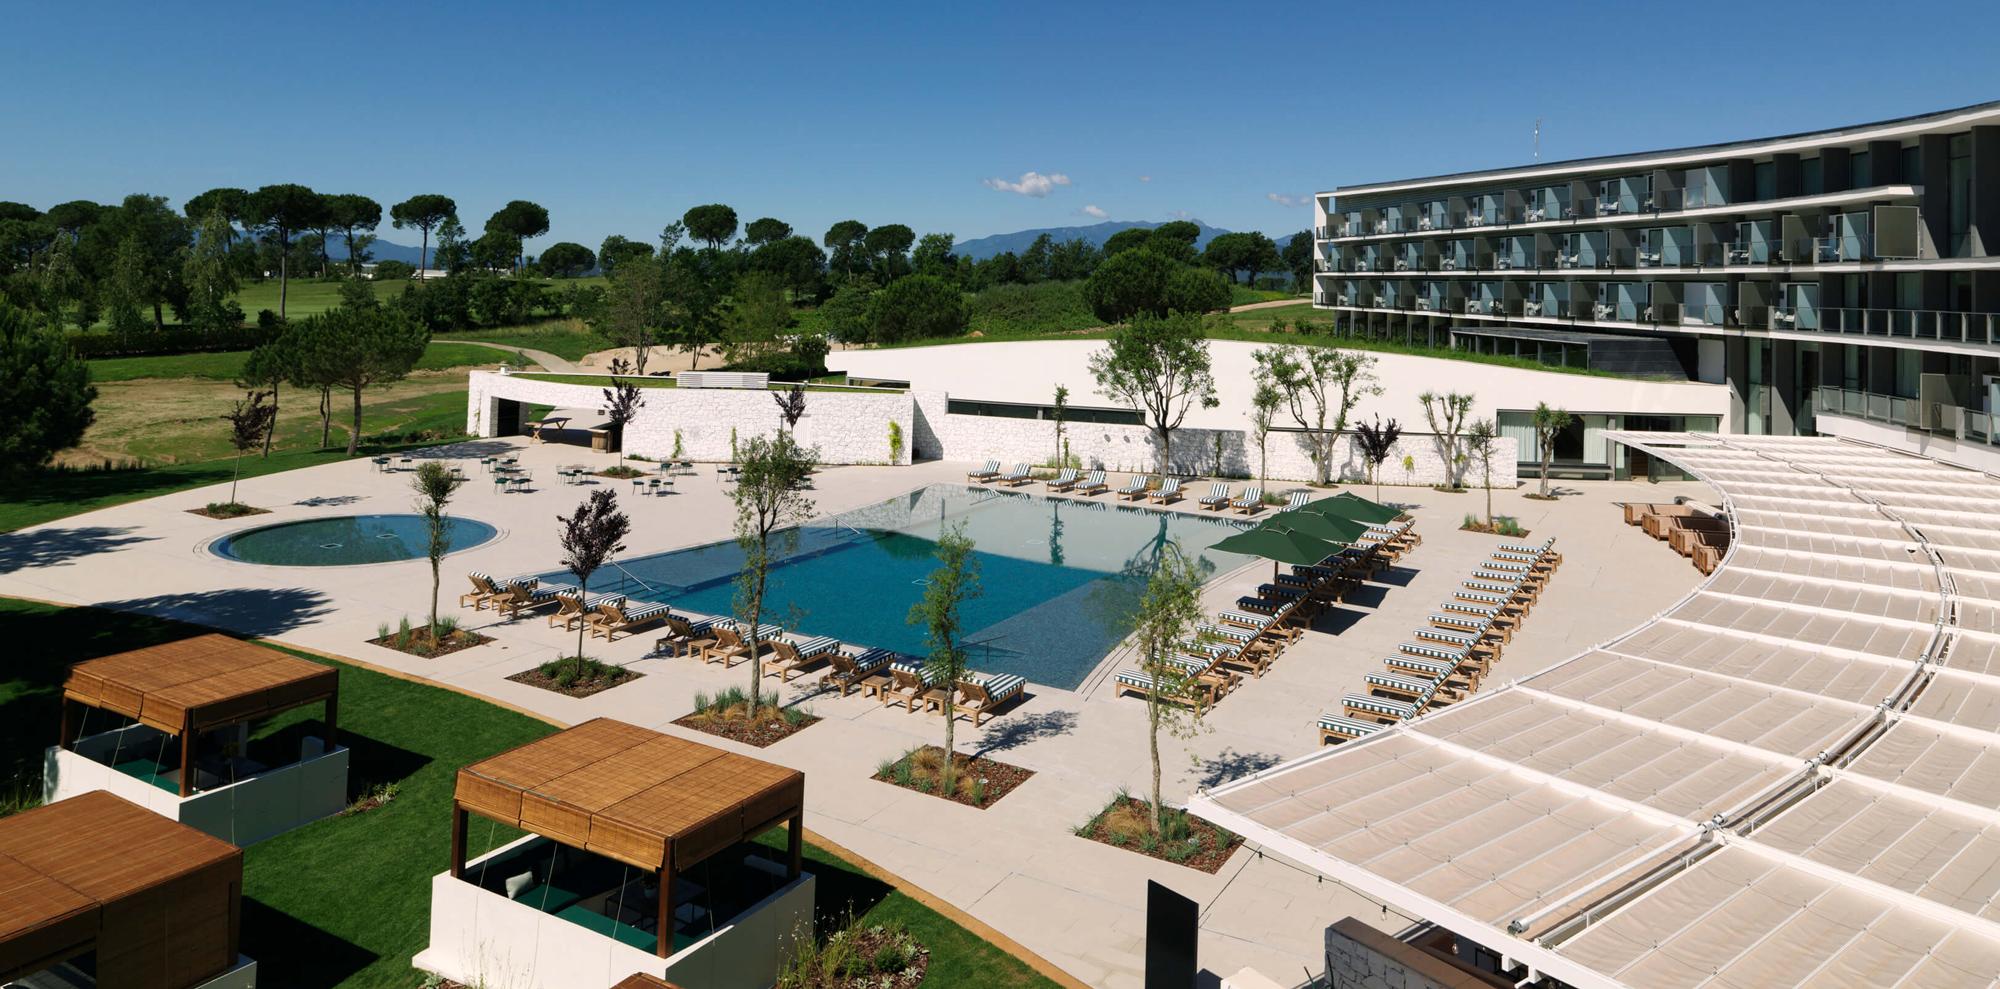 The Hotel Camiral's picturesque main pool in incredible Costa Brava.